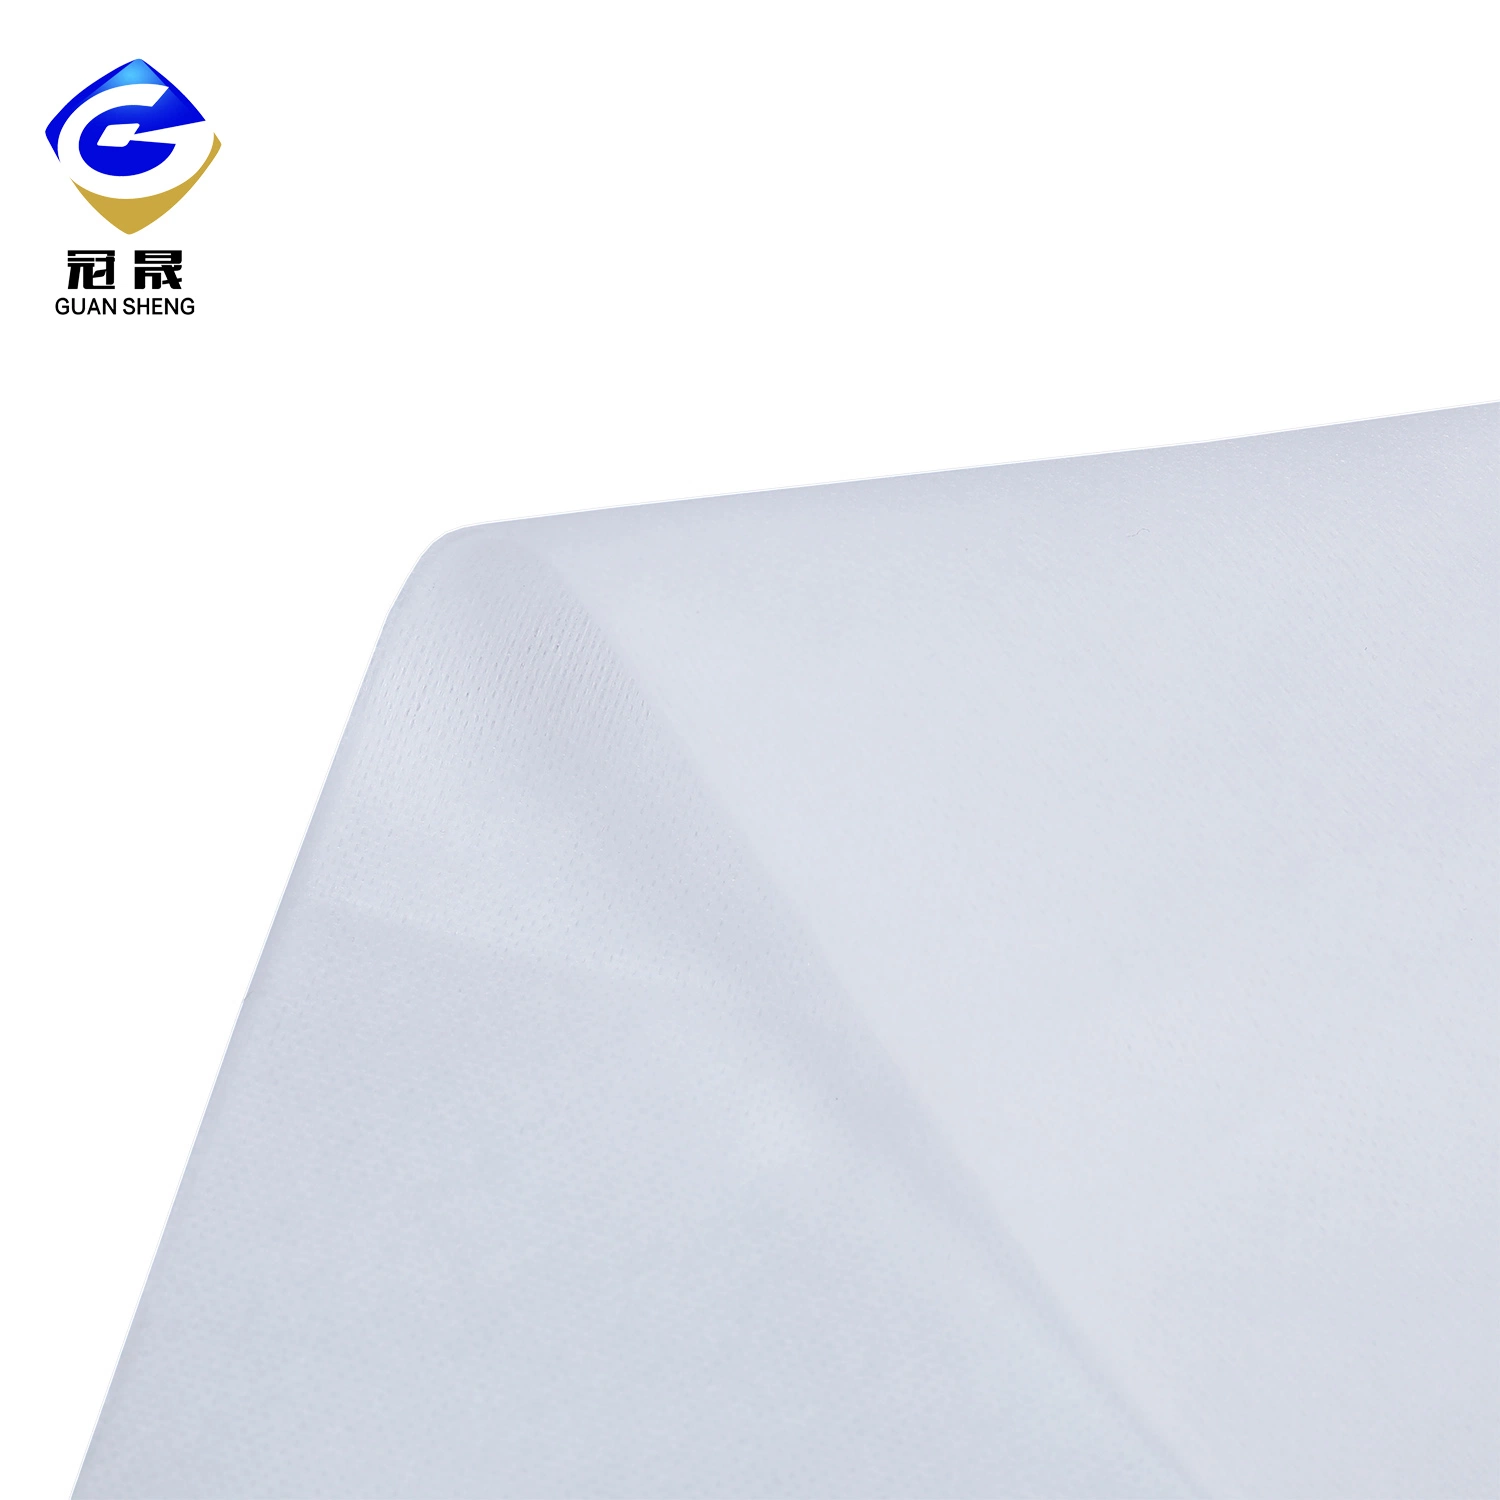 Spunlace Nonwoven Fabric for Medical Products